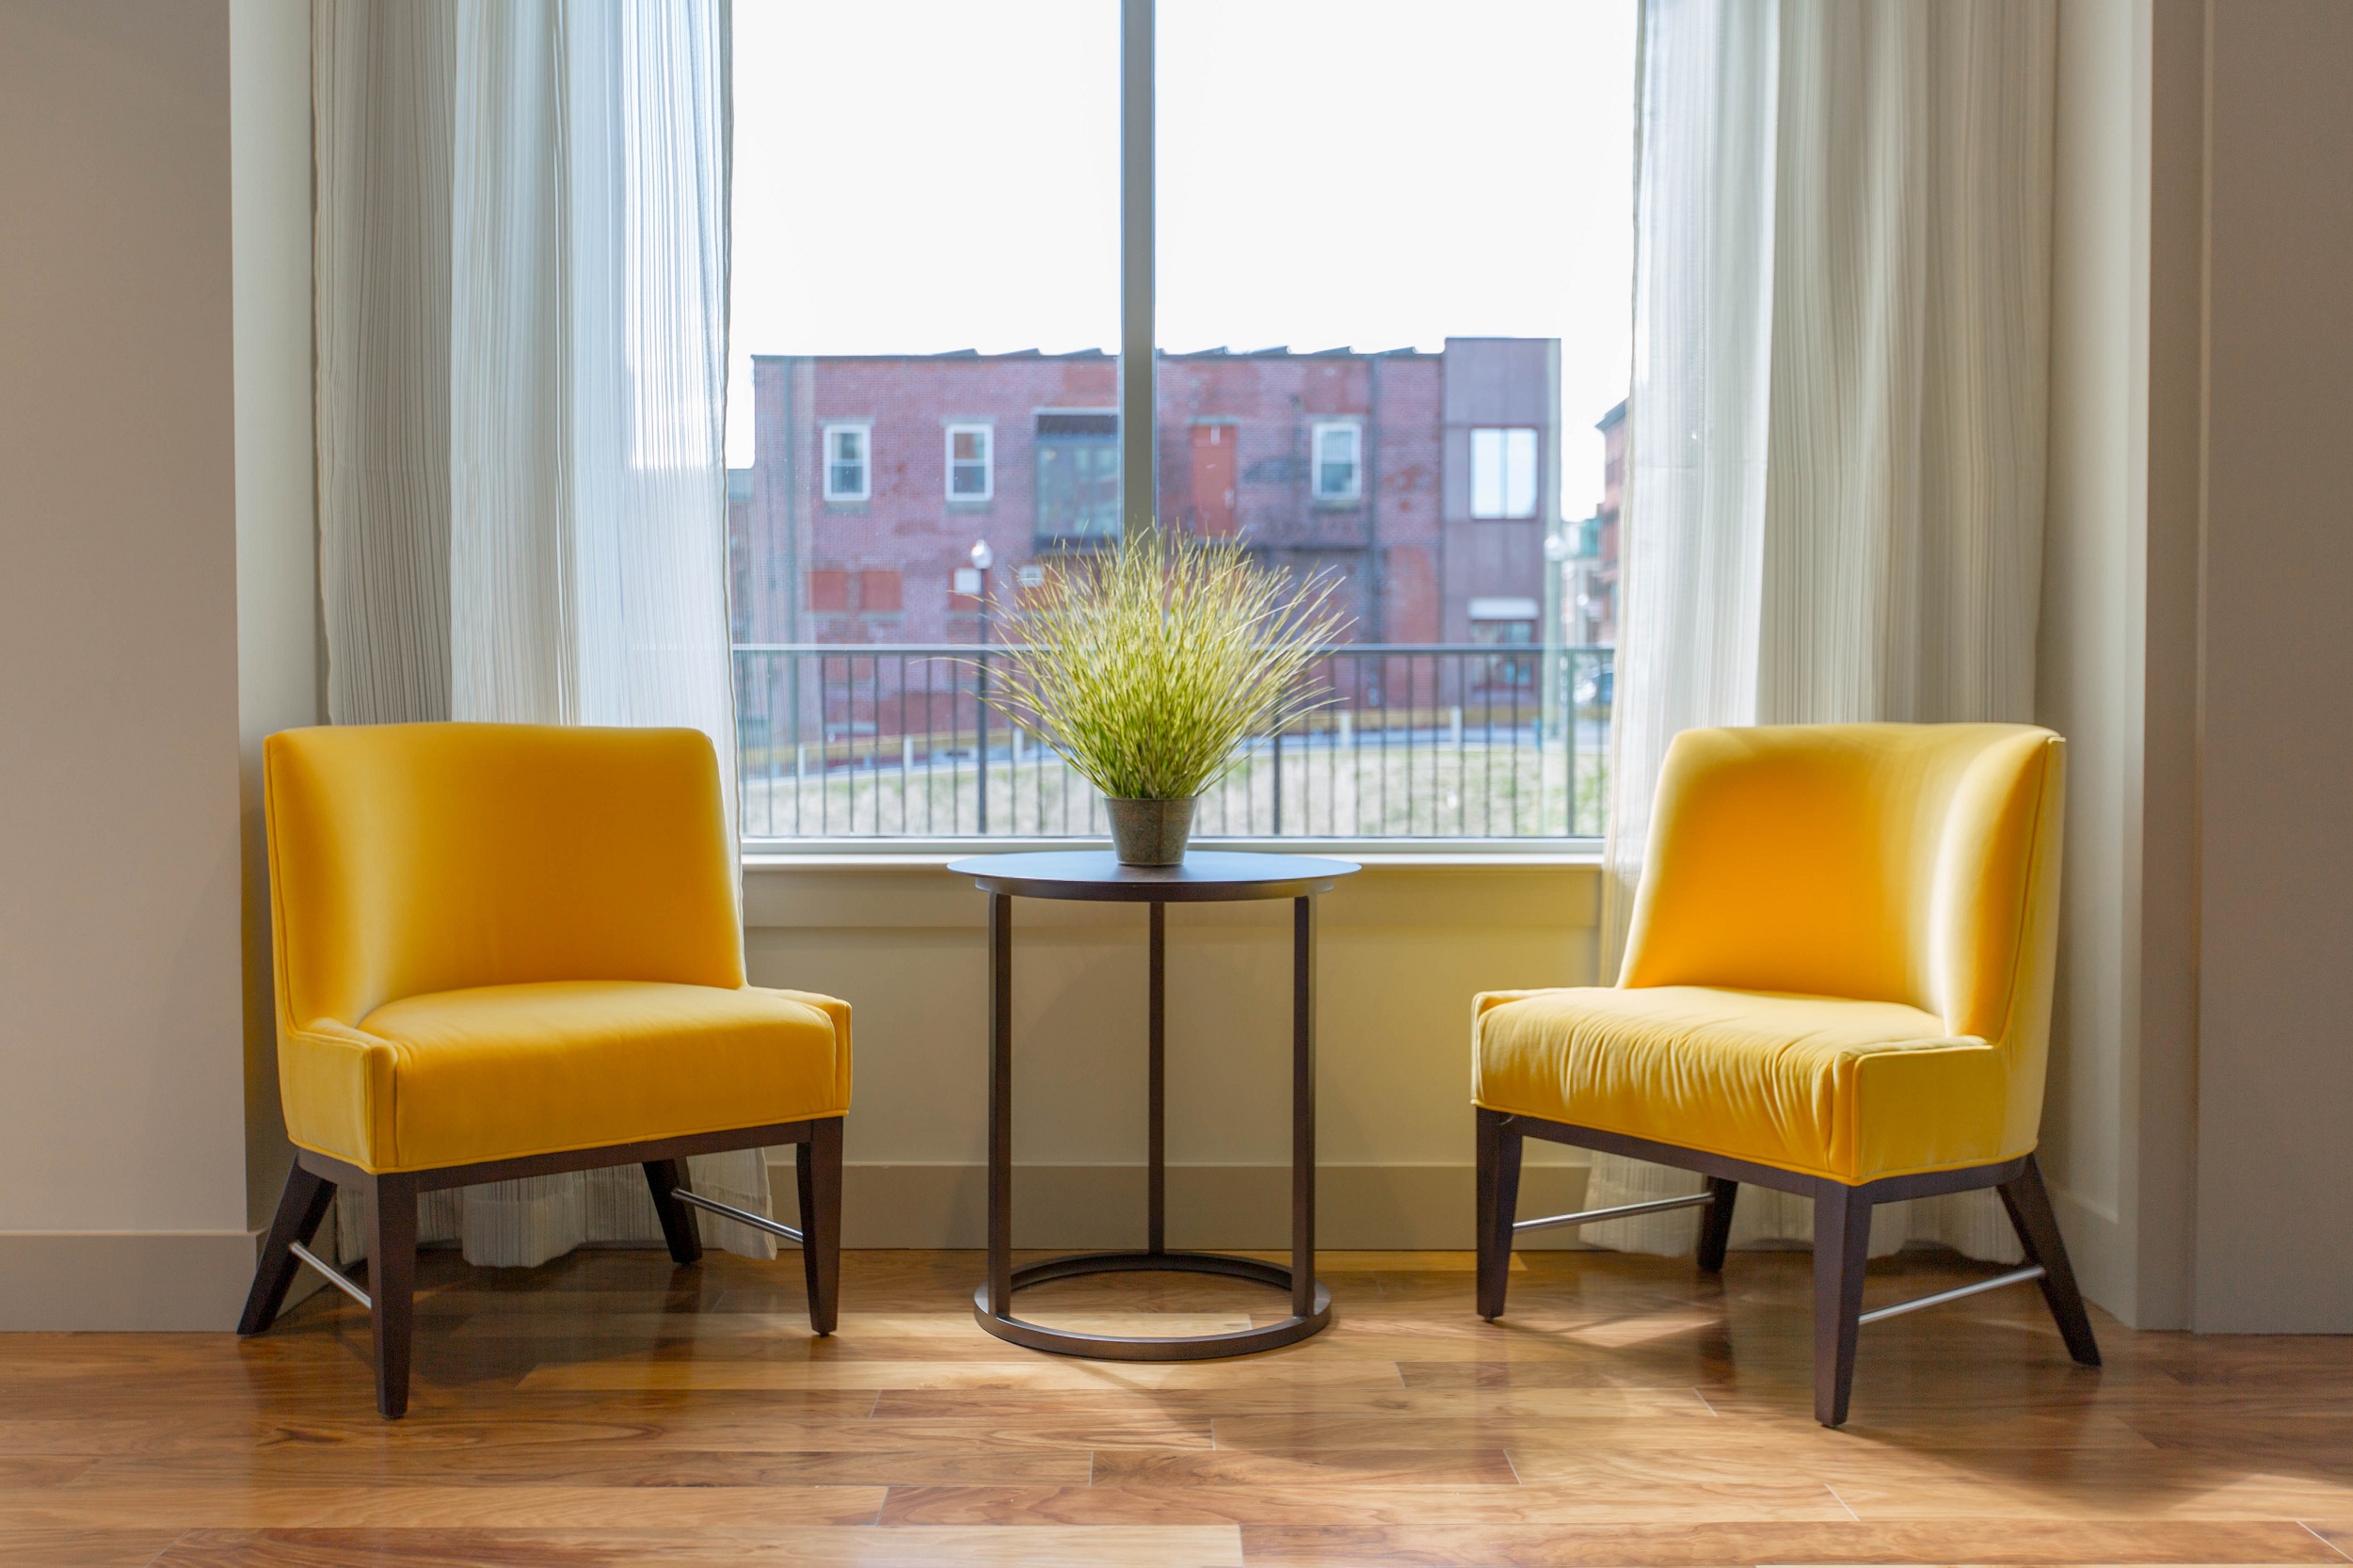 Yellow arm chairs by window